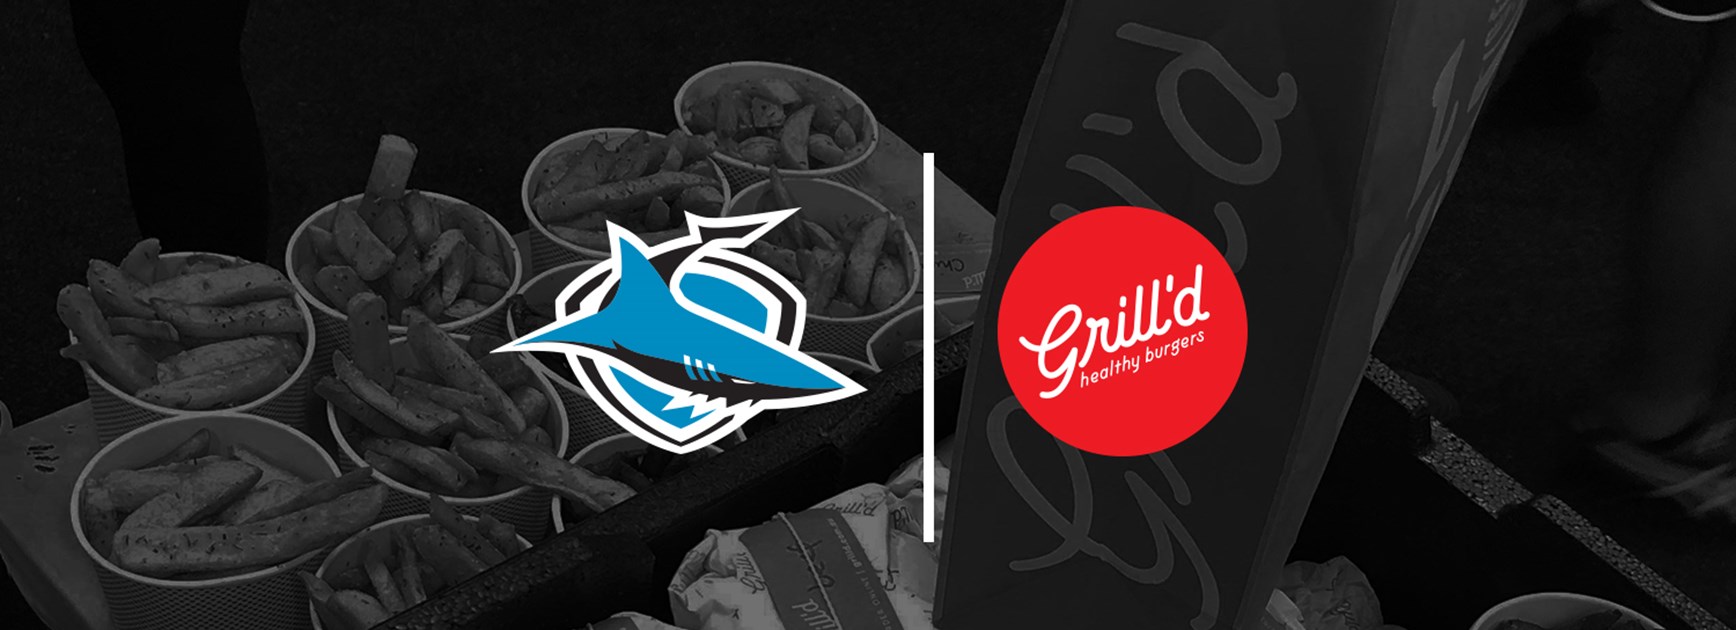 Grill’d Healthy Burgers are fuelling the Sharks this season